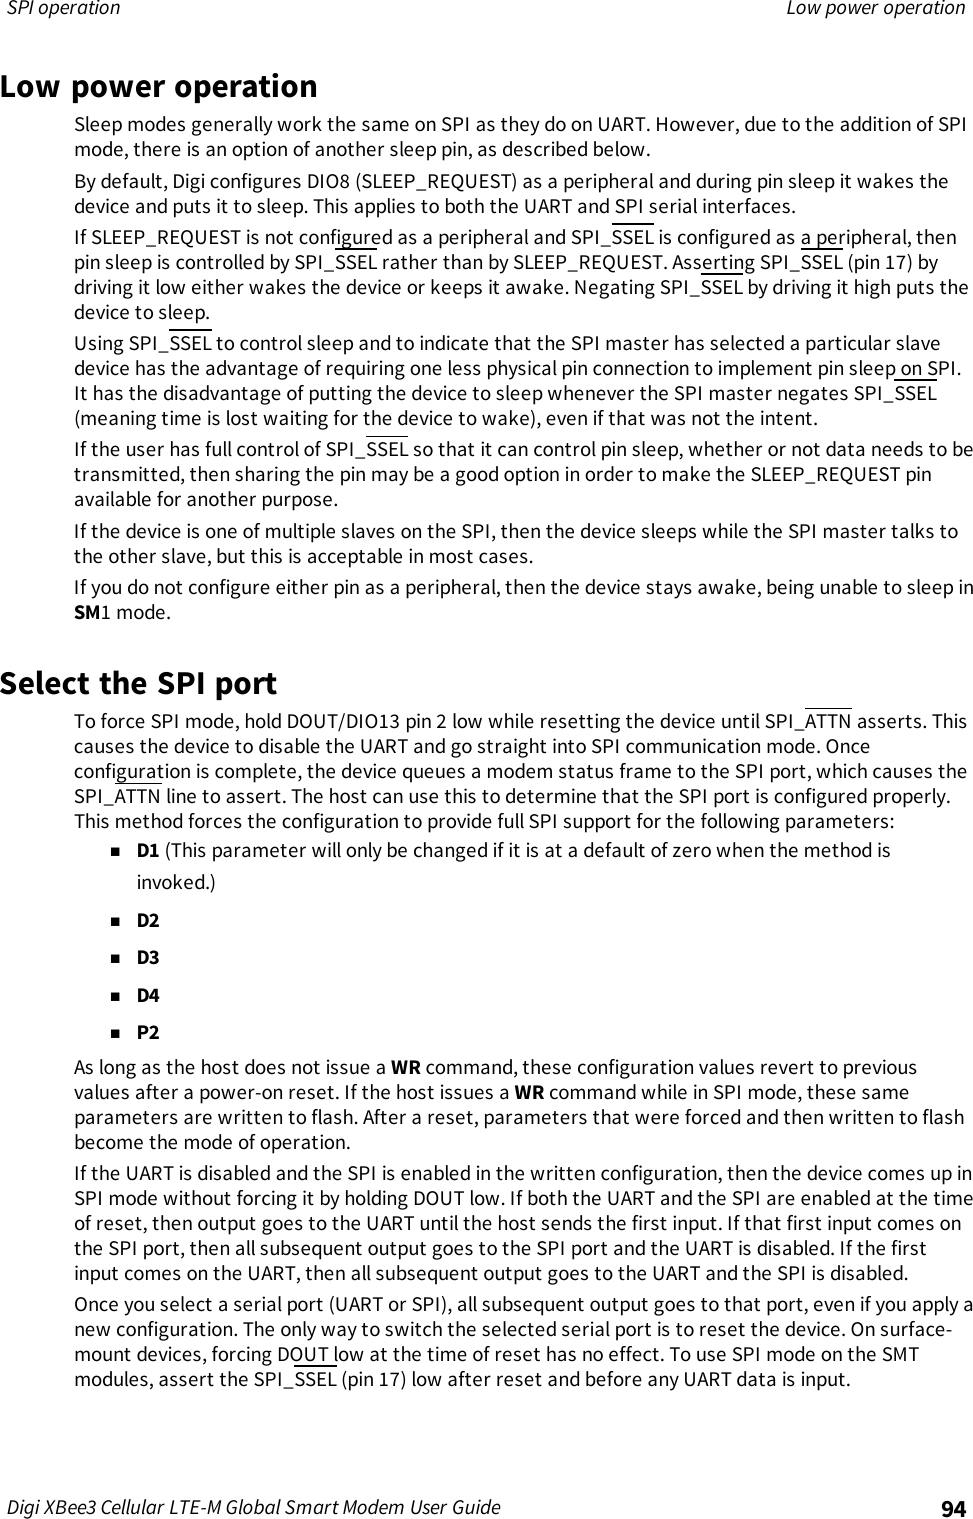 Page 94 of Digi XB3M1 XBee3 Cellular LTE-M User Manual 